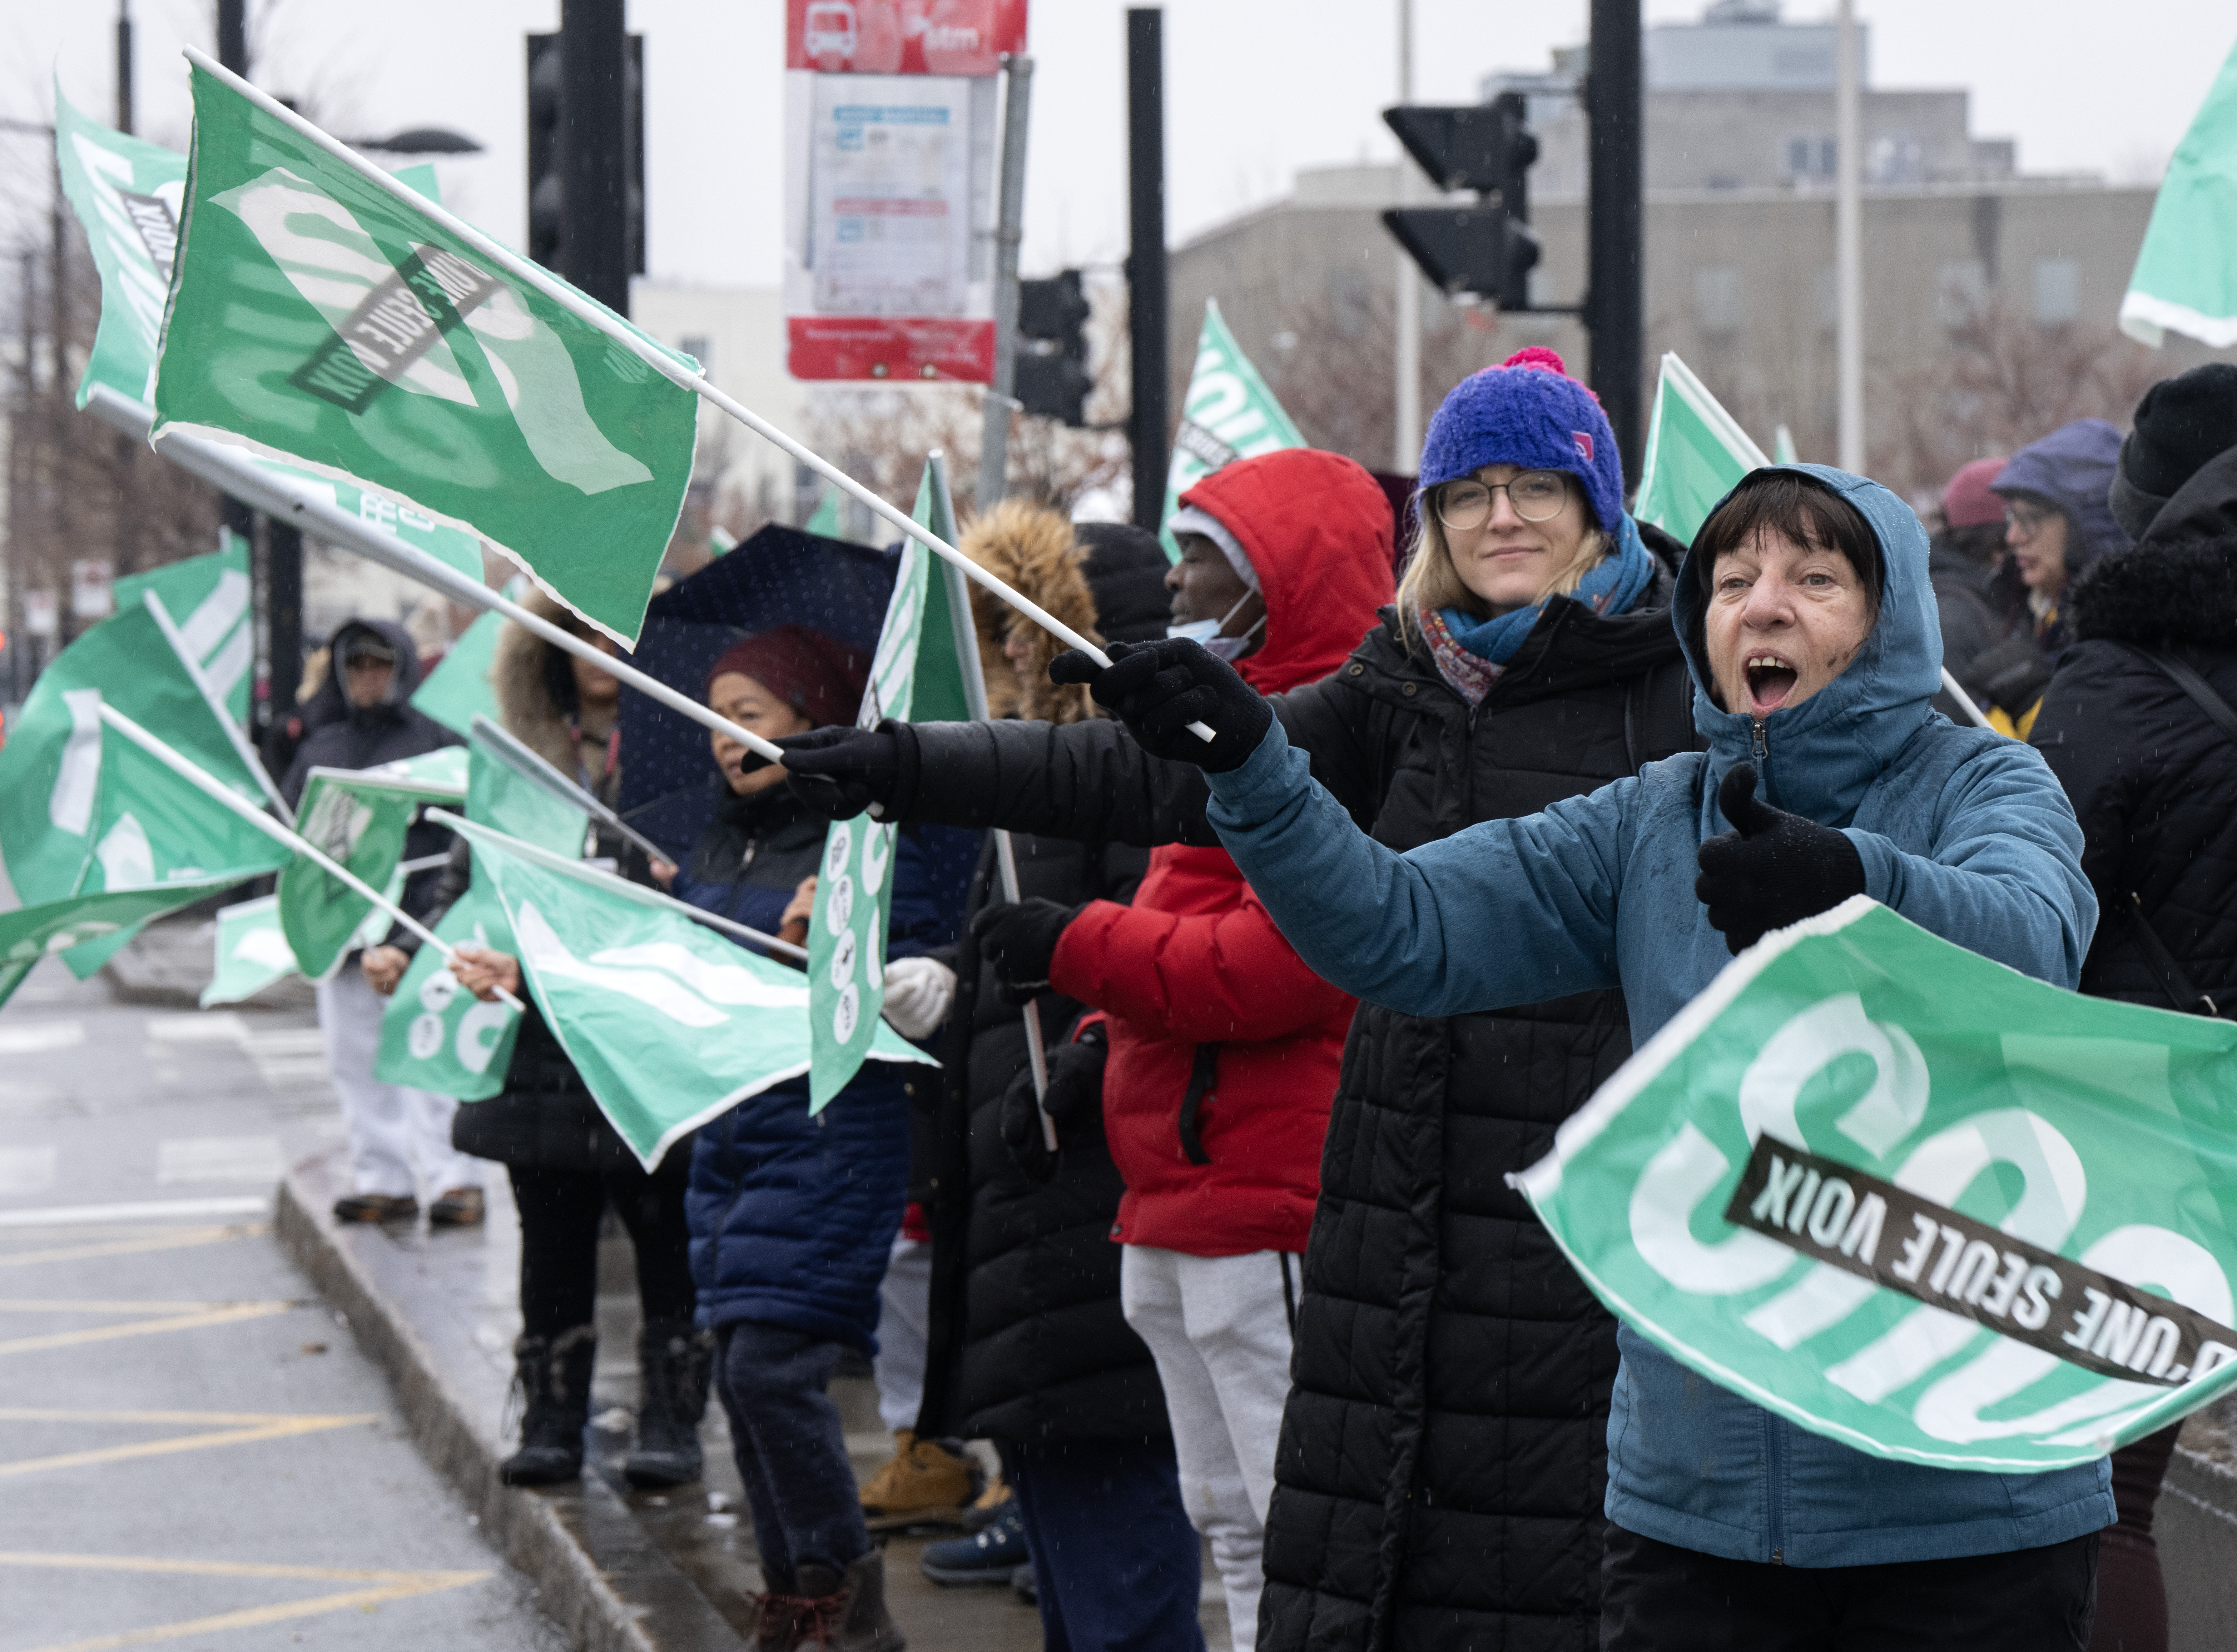 Quebec inks tentative deals on working conditions with all ‘common front’ labour unions